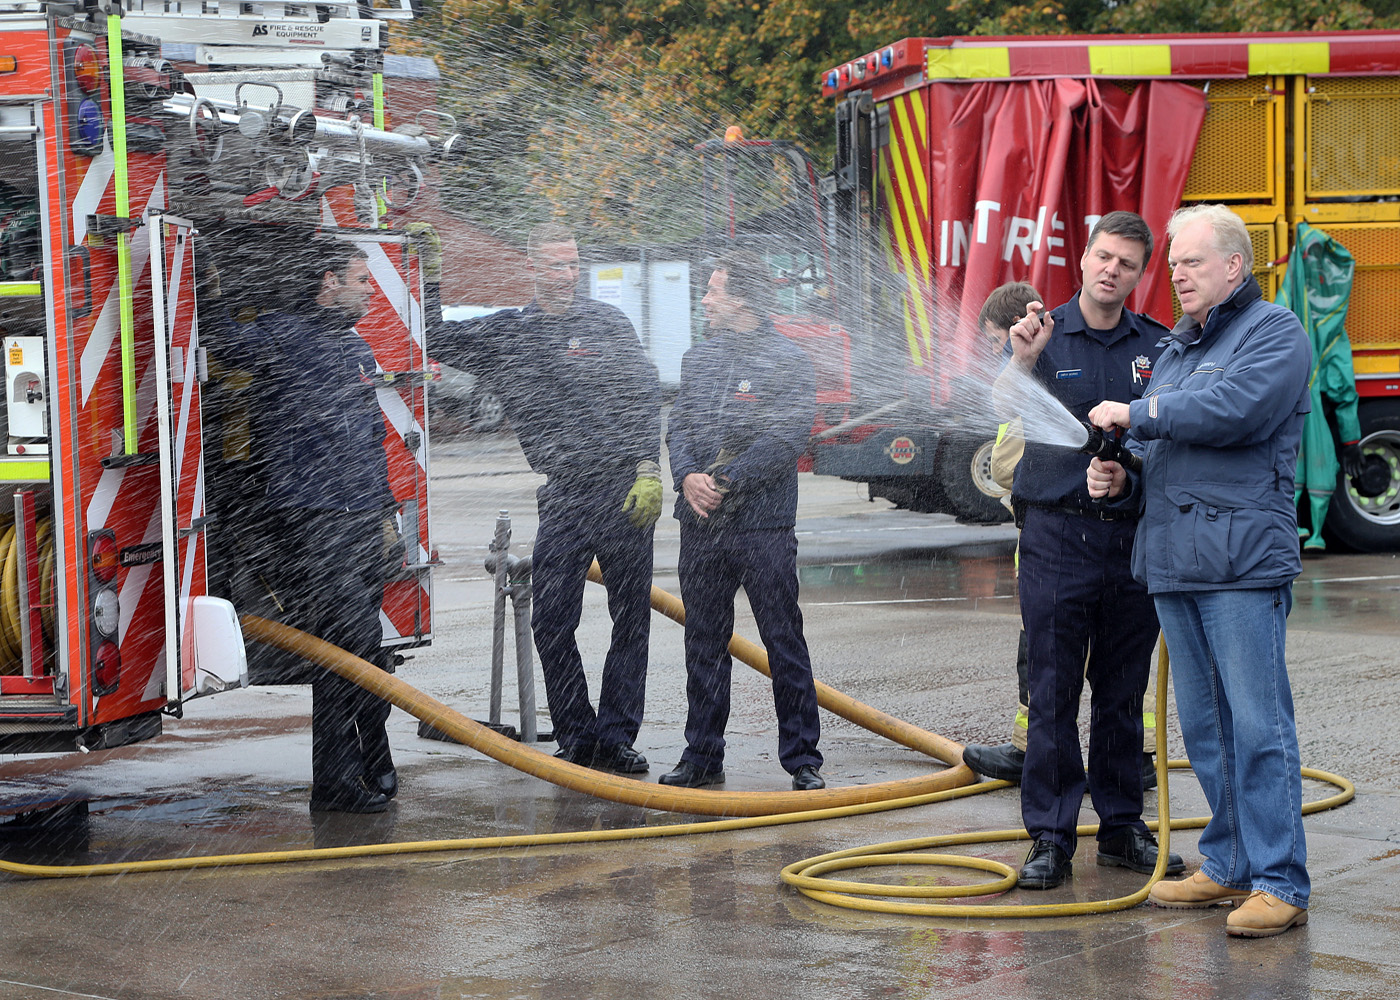 Crew Manager Simon Morris shows a visitor how to operate a fire hose.